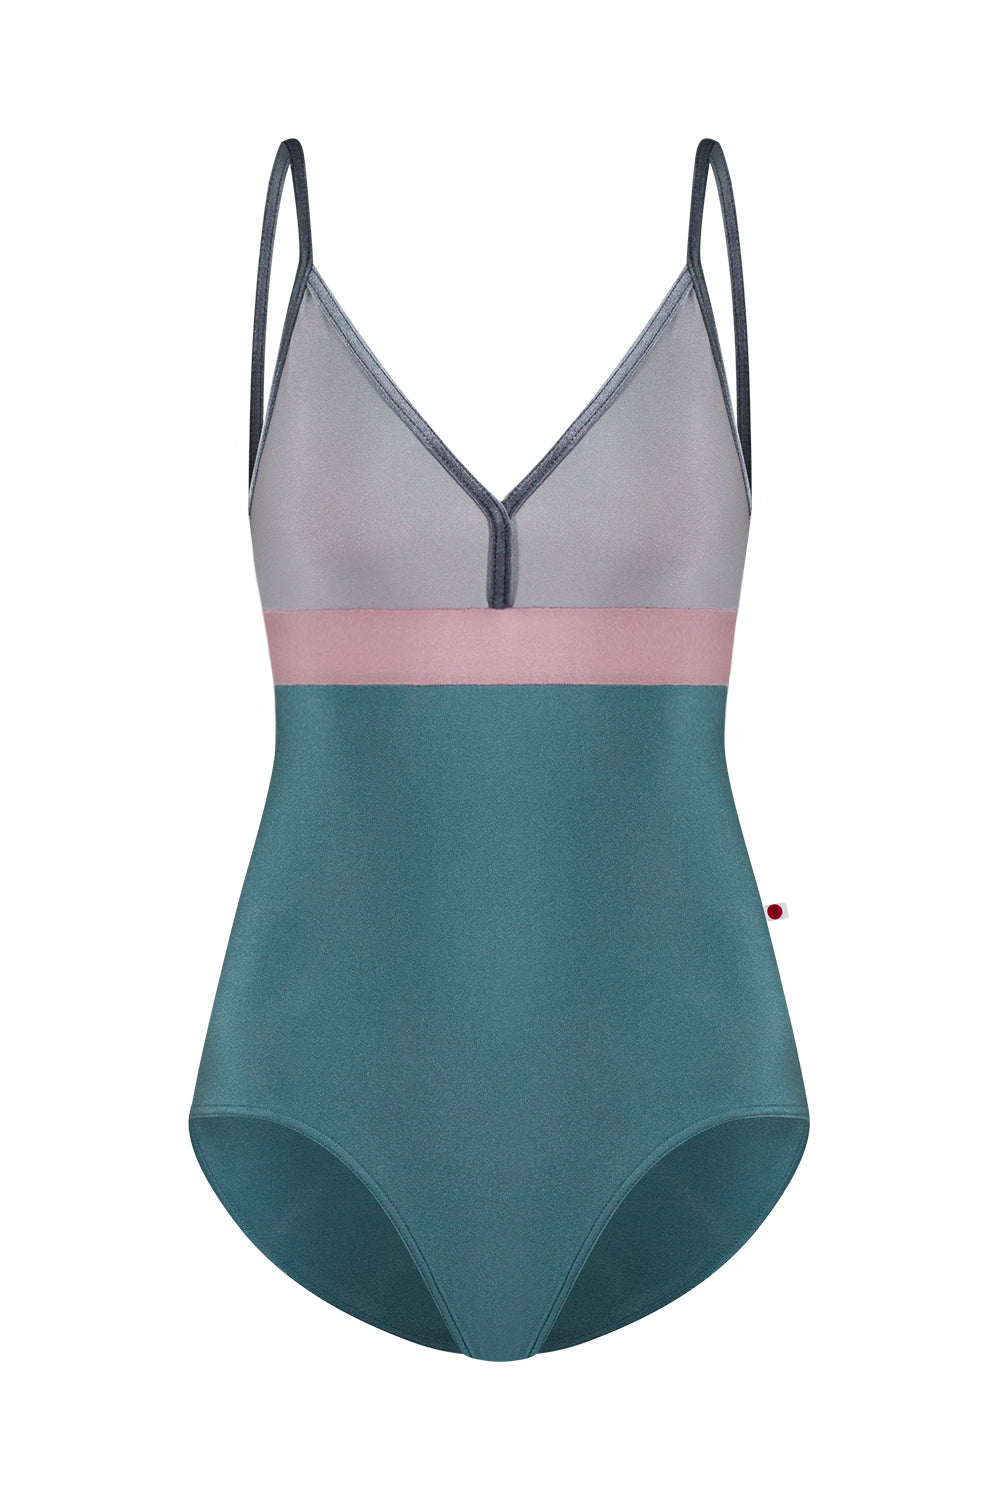 Yumiko Zoe Leotard in Frost and Sterling FW23-19